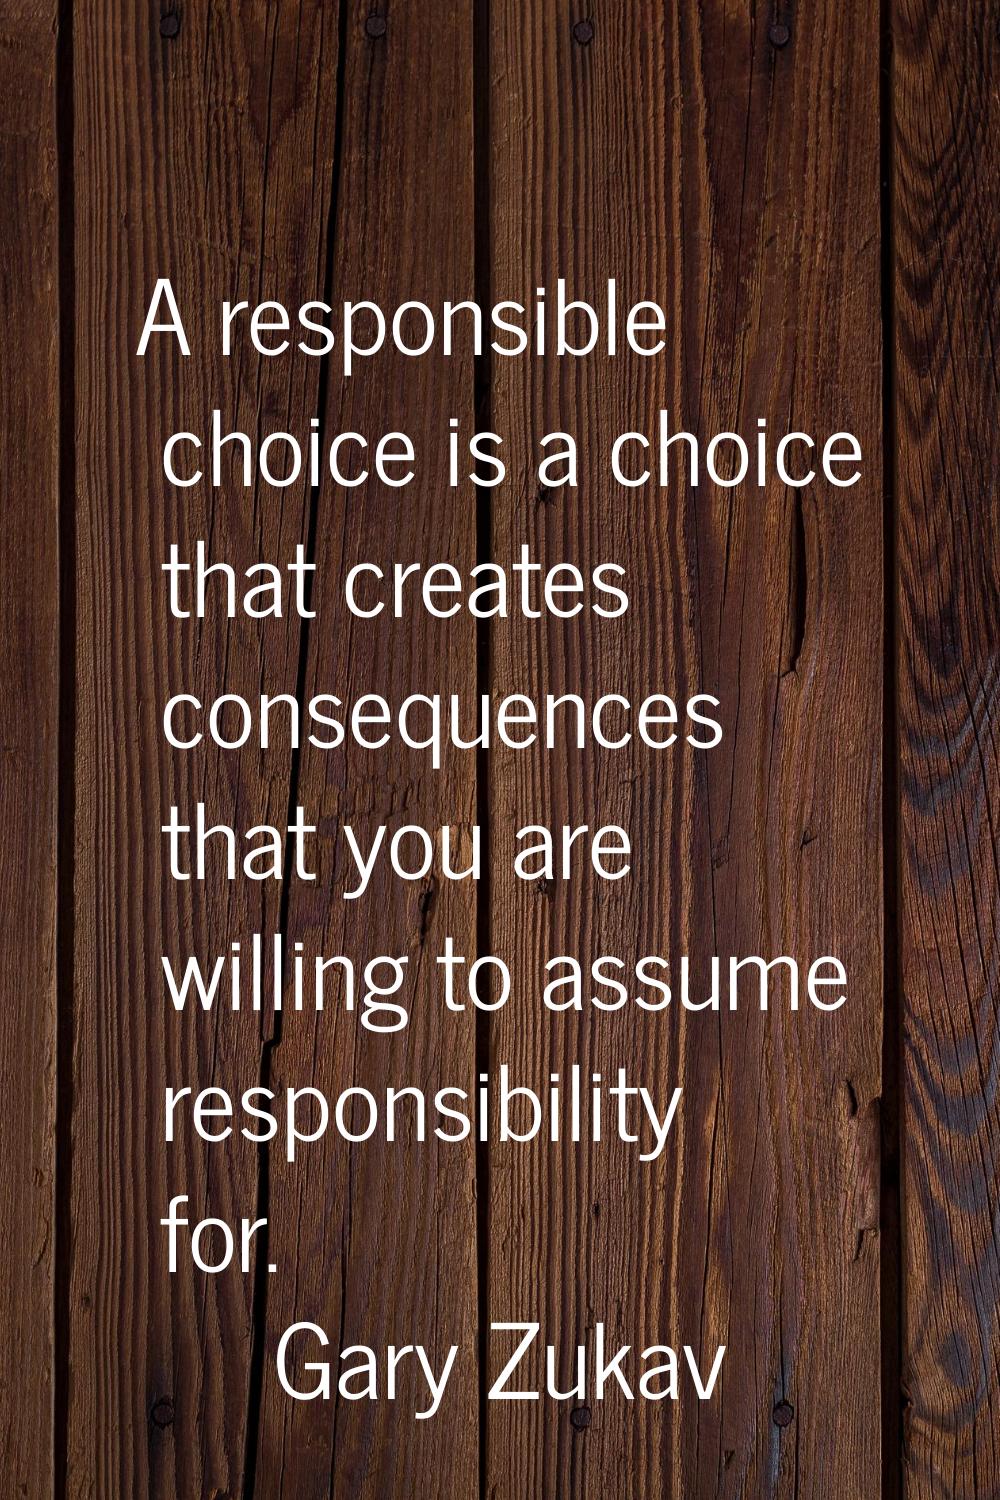 A responsible choice is a choice that creates consequences that you are willing to assume responsib